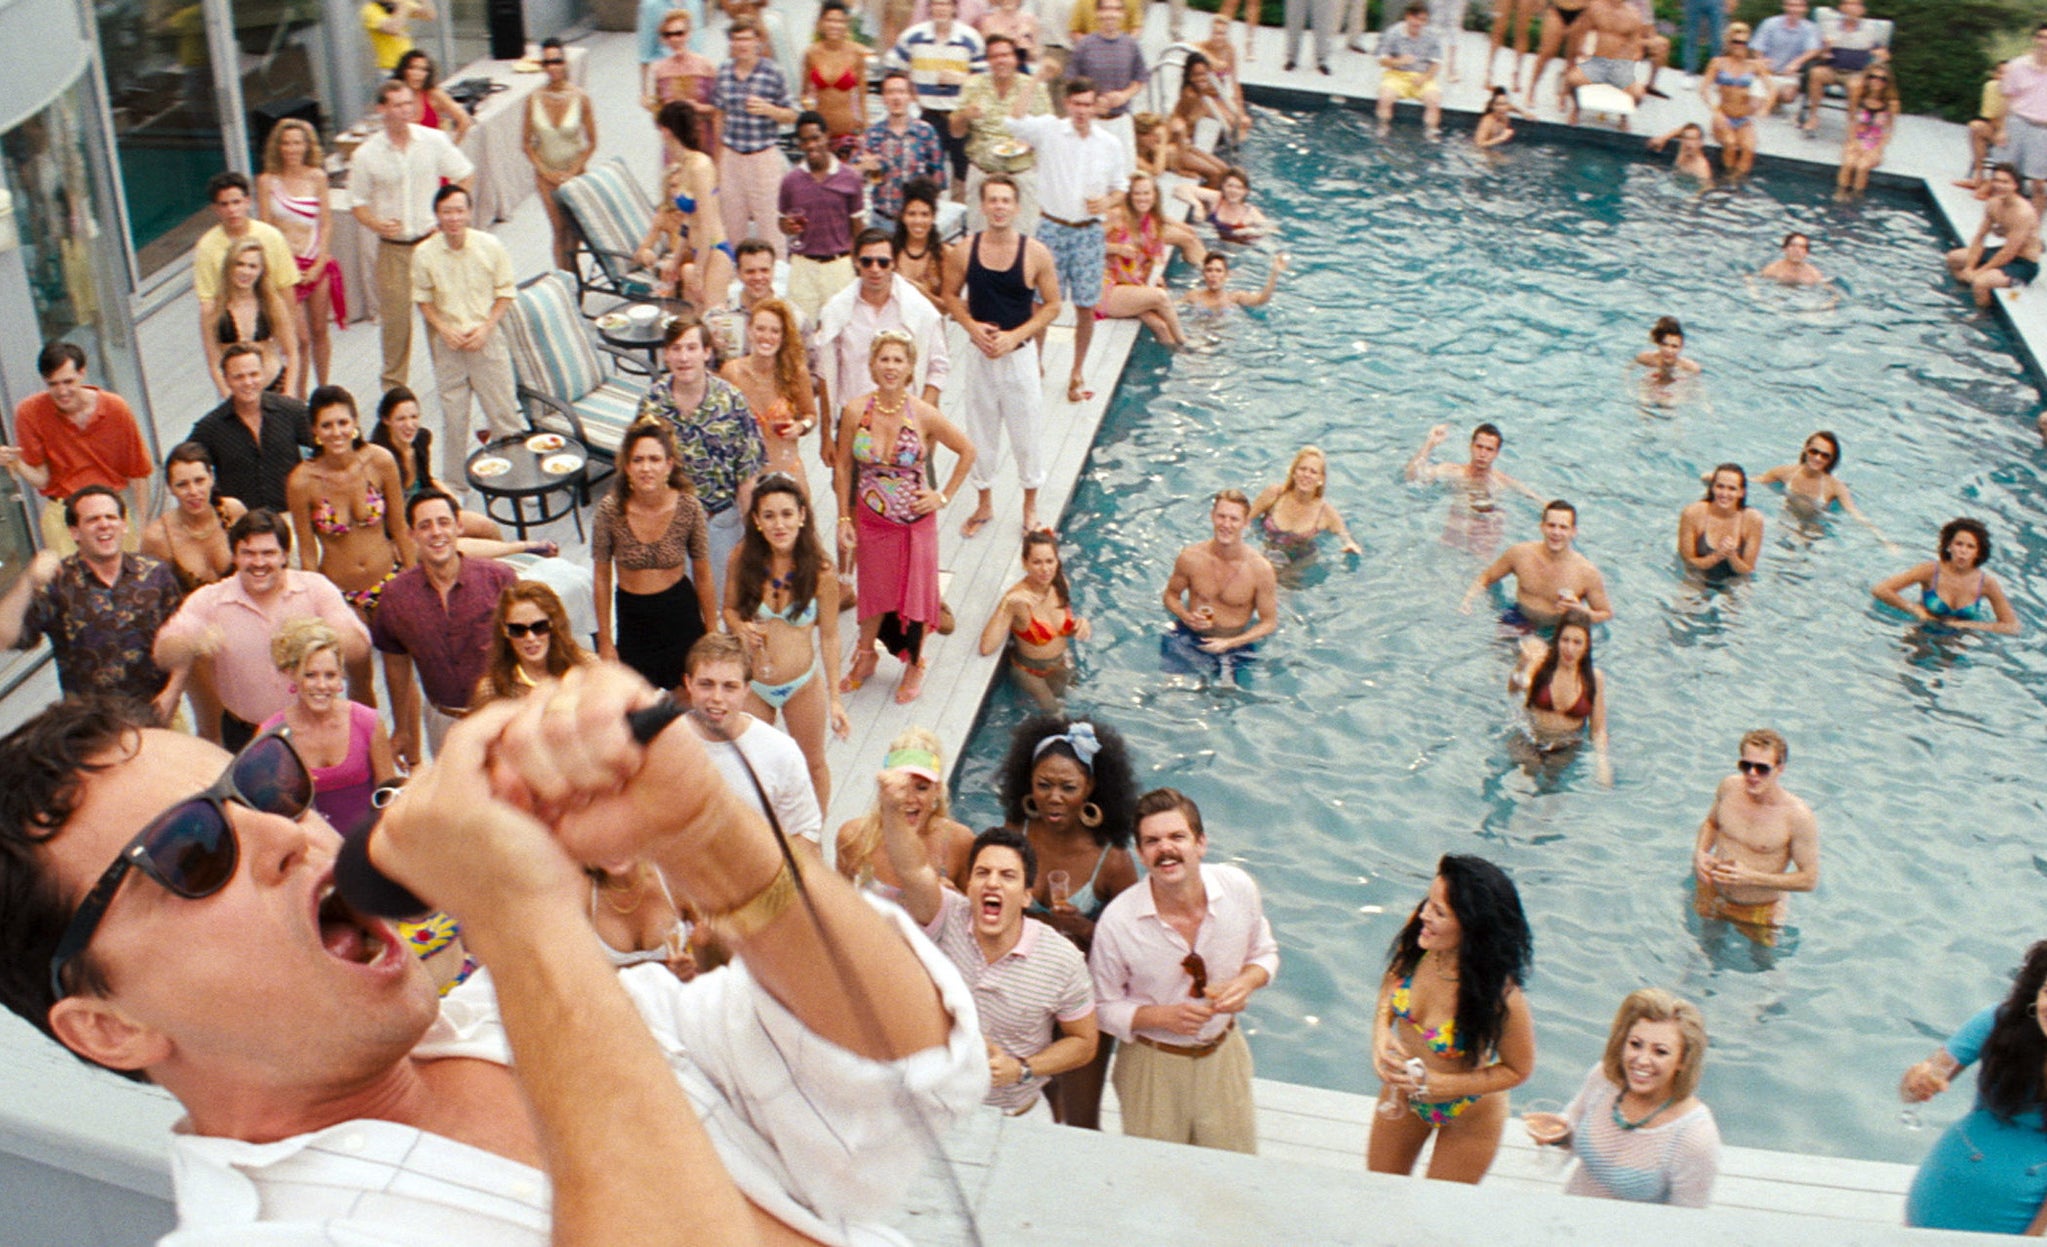 Leonardo DiCaprio shouts into a microphone at a pool party